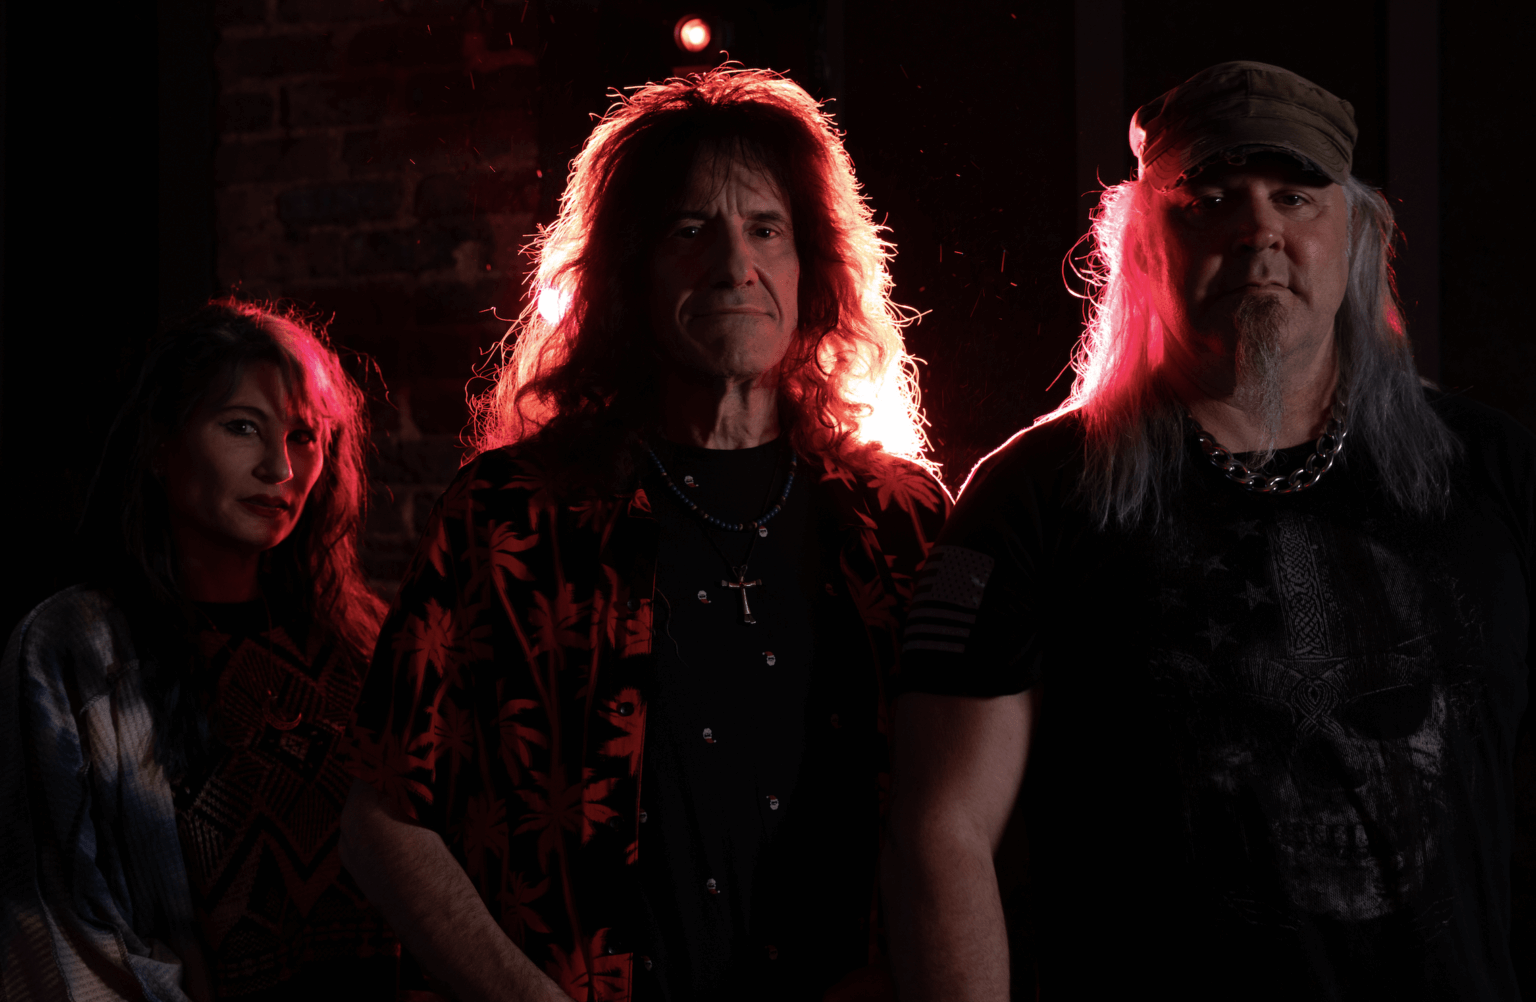 Chicago based Rock 'n Roll band TAFOYA share new single "Shadows." The track is off the trio's forthcoming release Freedom